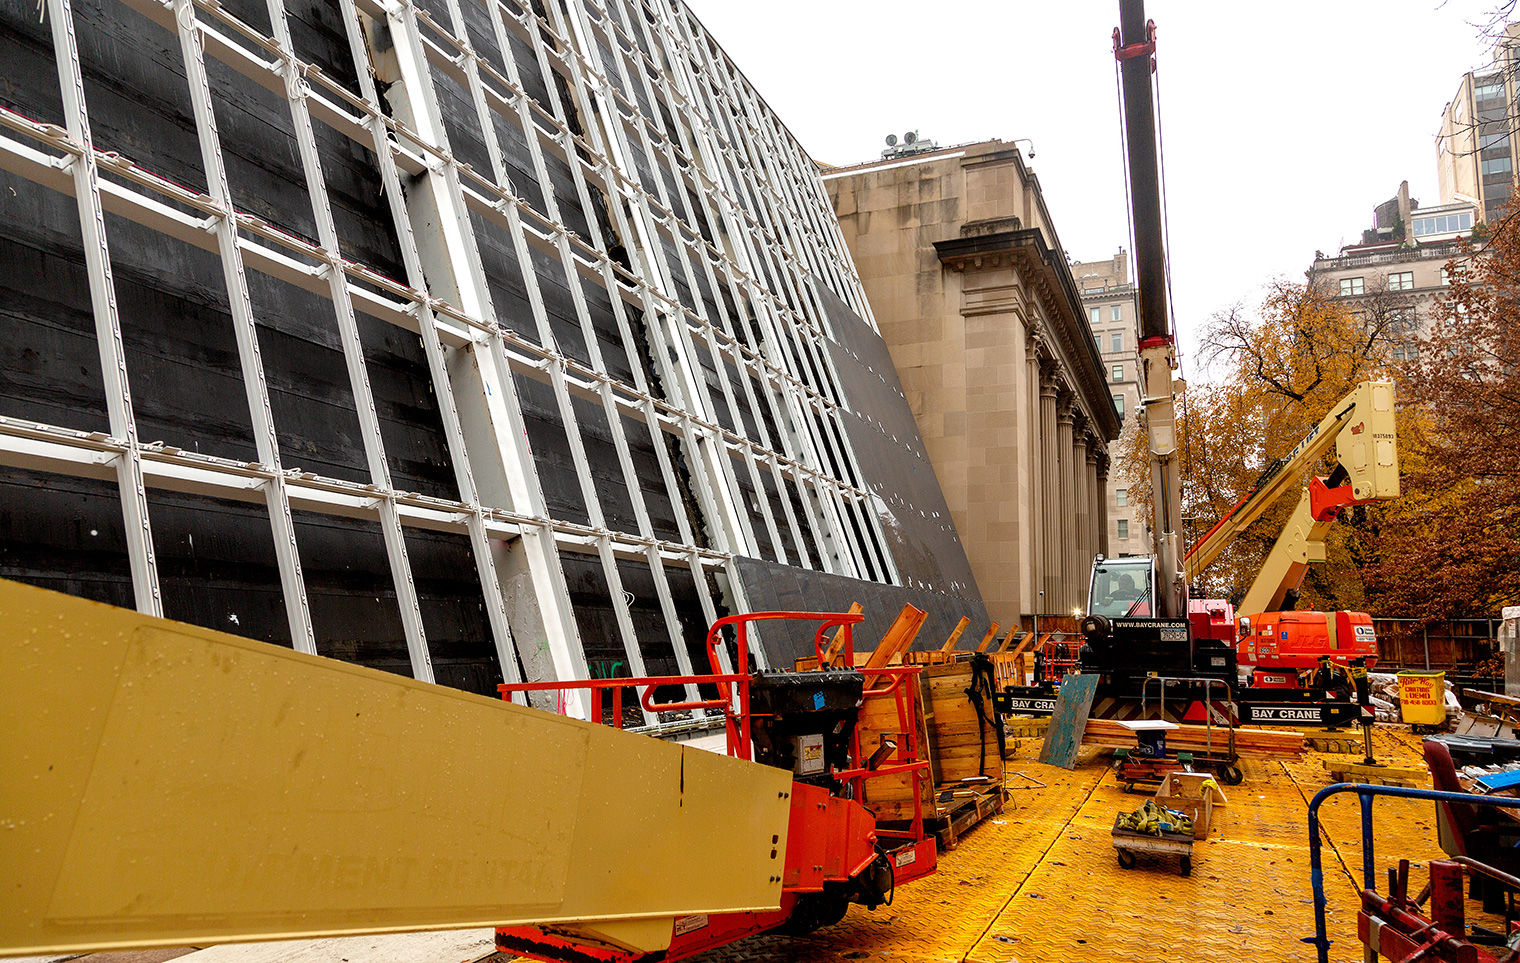 Exterior view of installing the new curtain wall of The Michael C. Rockefeller Wing at The Met Museum